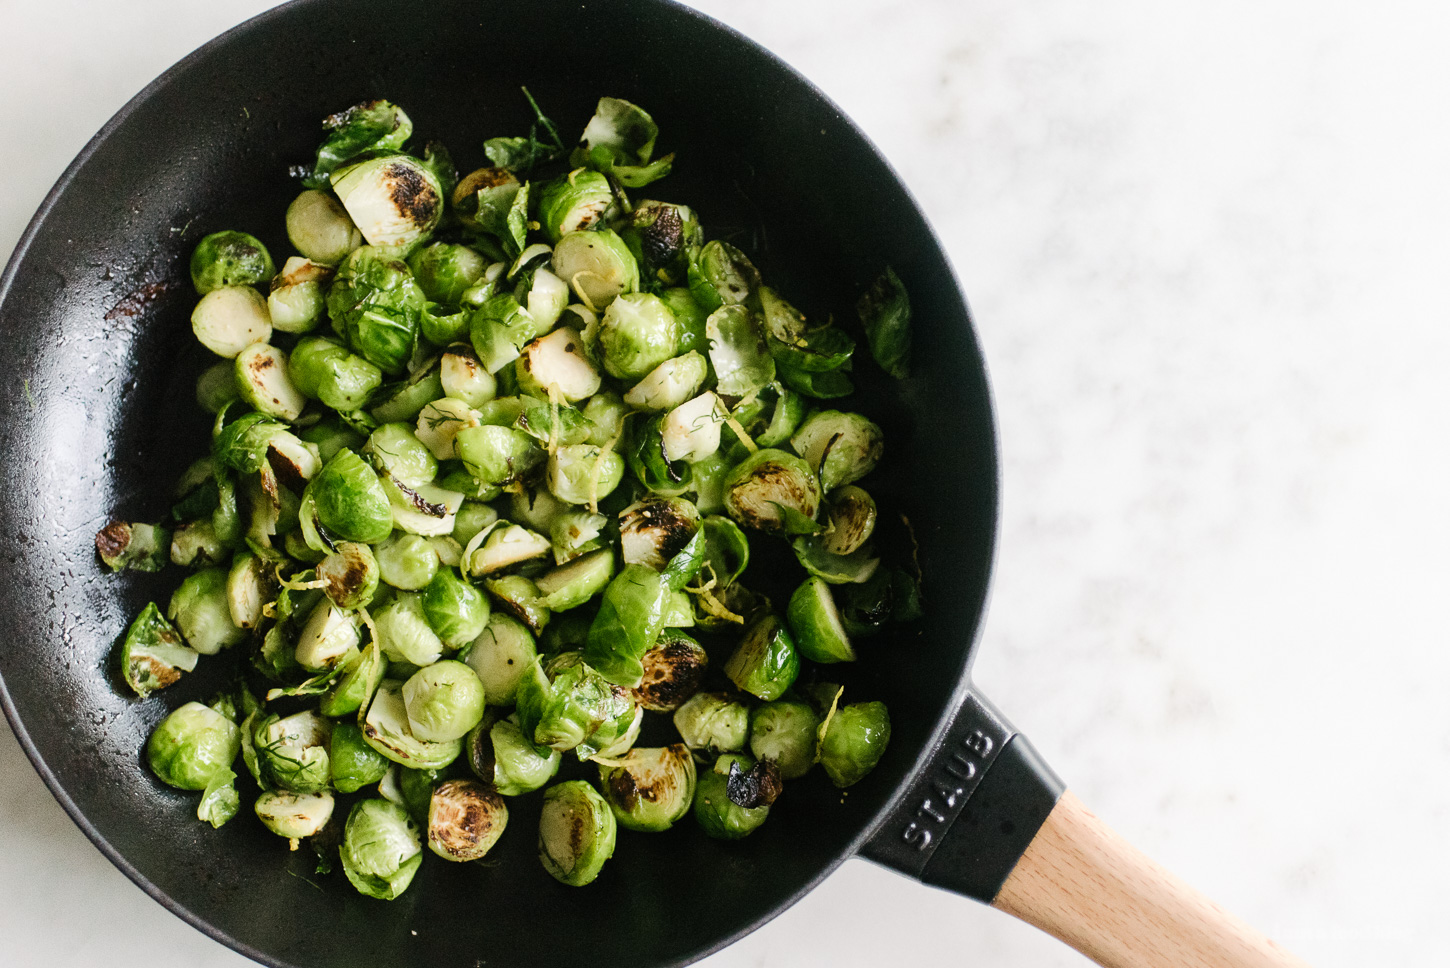 Lemon & Dill Pan Roasted Brussel Sprouts